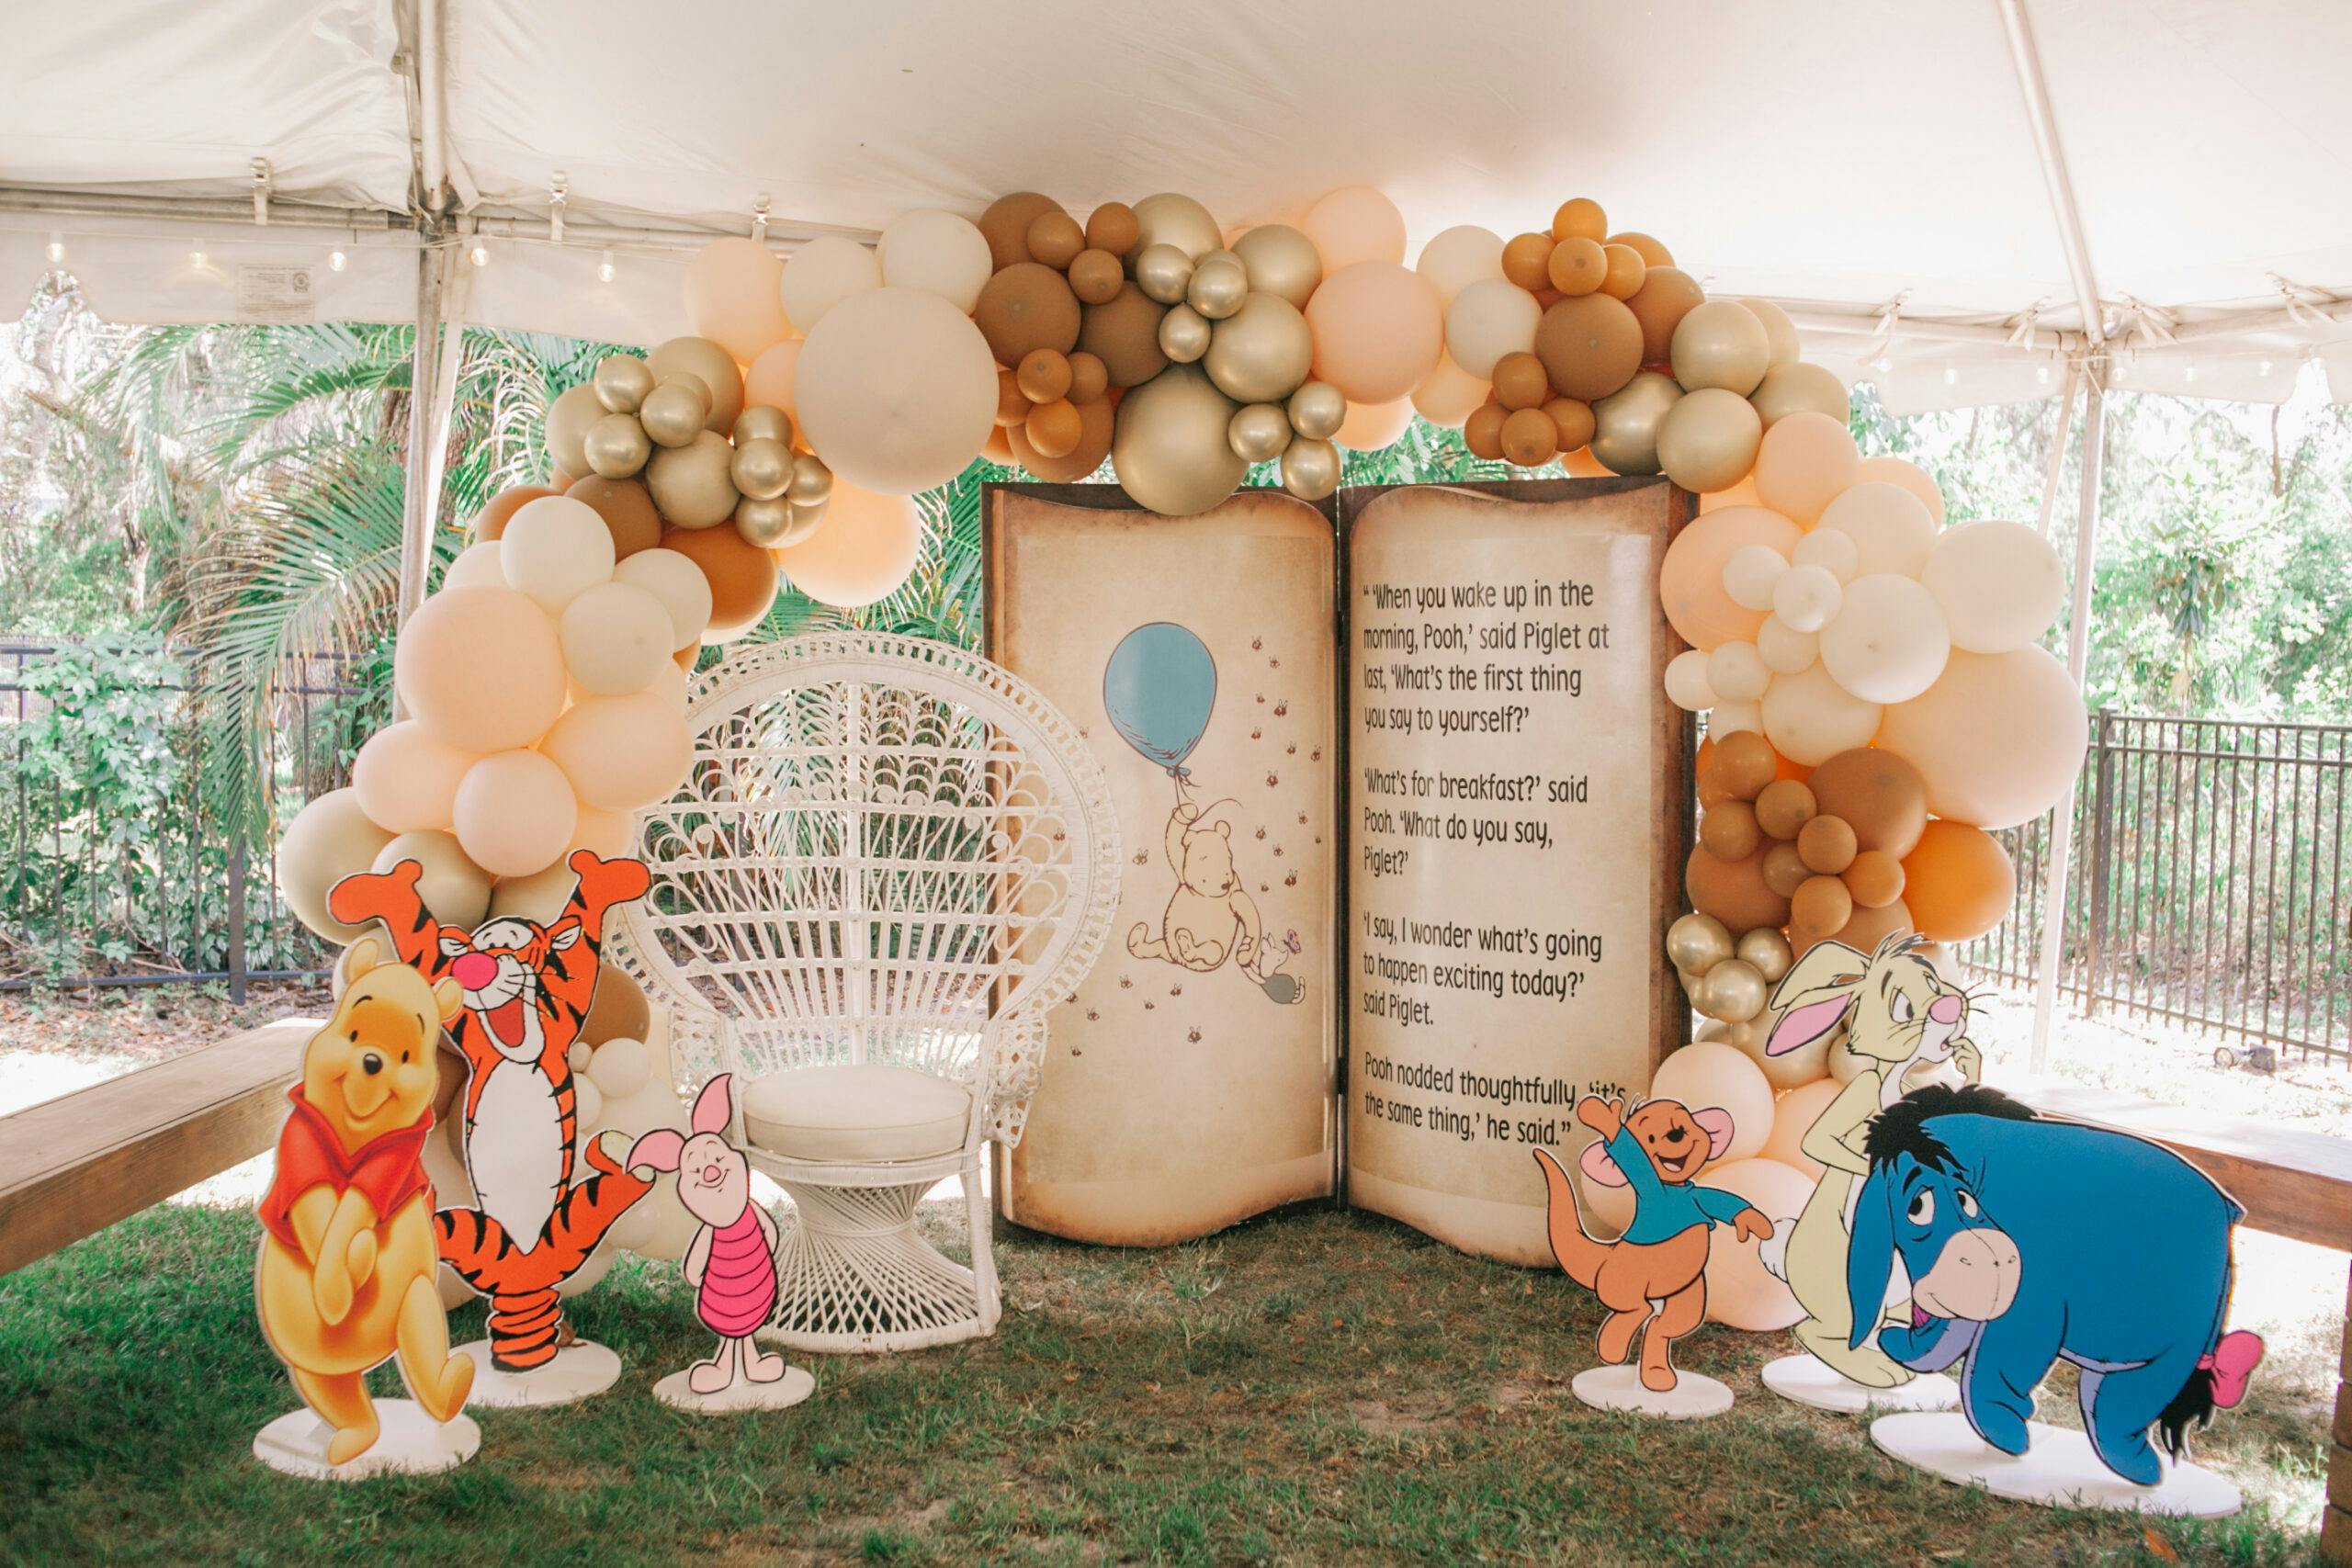 Adorable Winnie The Pooh Inspired Baby Shower in Tampa, Florida